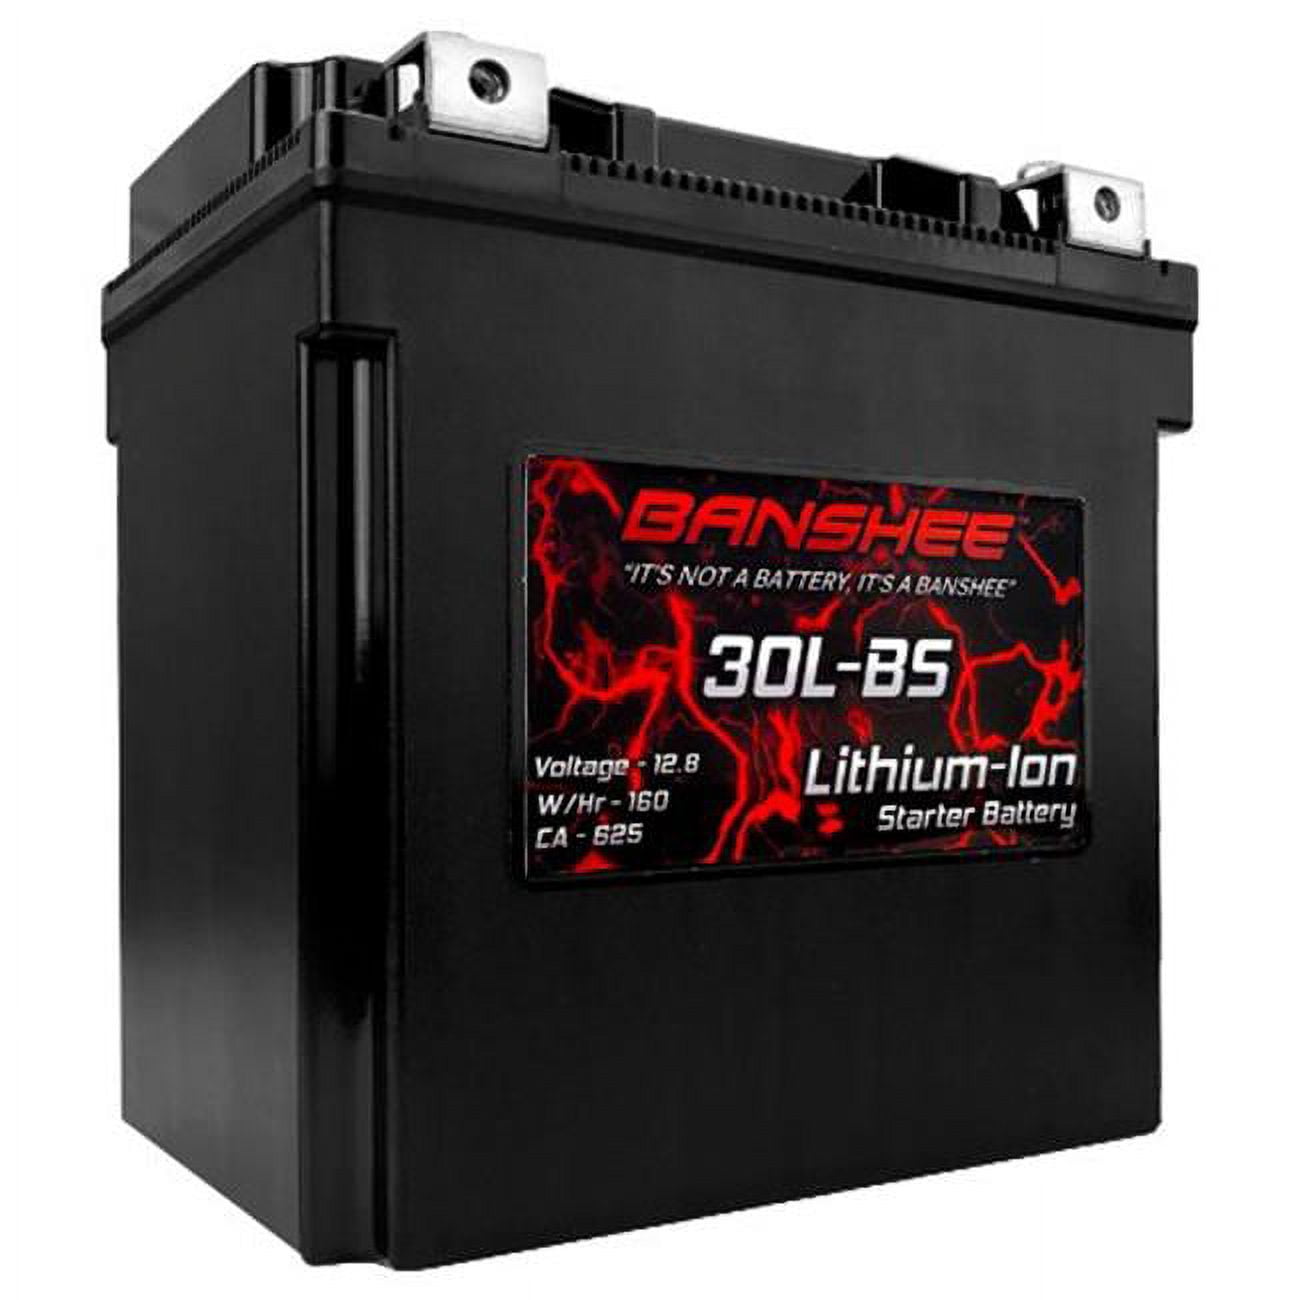 Picture of Banshee DLFP30L-BS-08 12.8V Lithium LiFePO4 Battery 30L-BS for Replacement Yuasa YIX30L-BS Flush Terminals